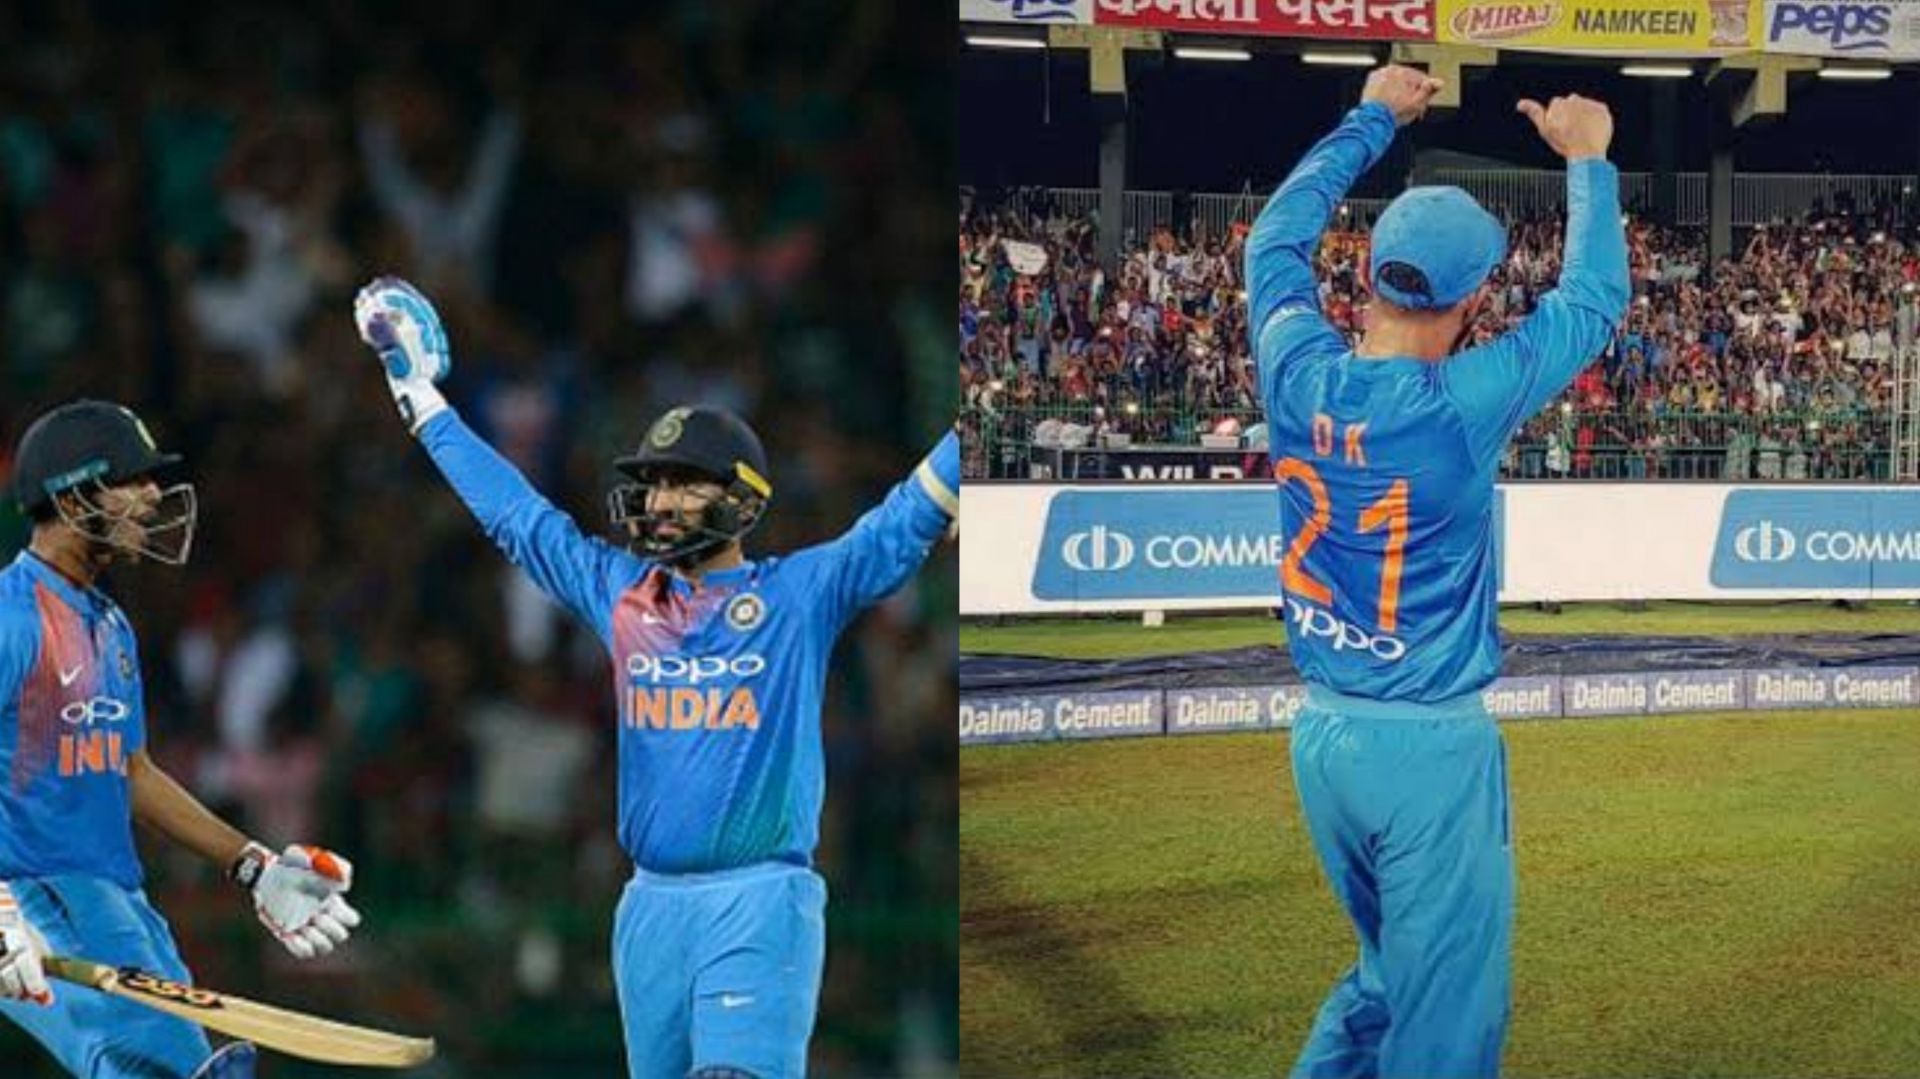 Dinesh Karthik played one of the best T20I knocks of all time